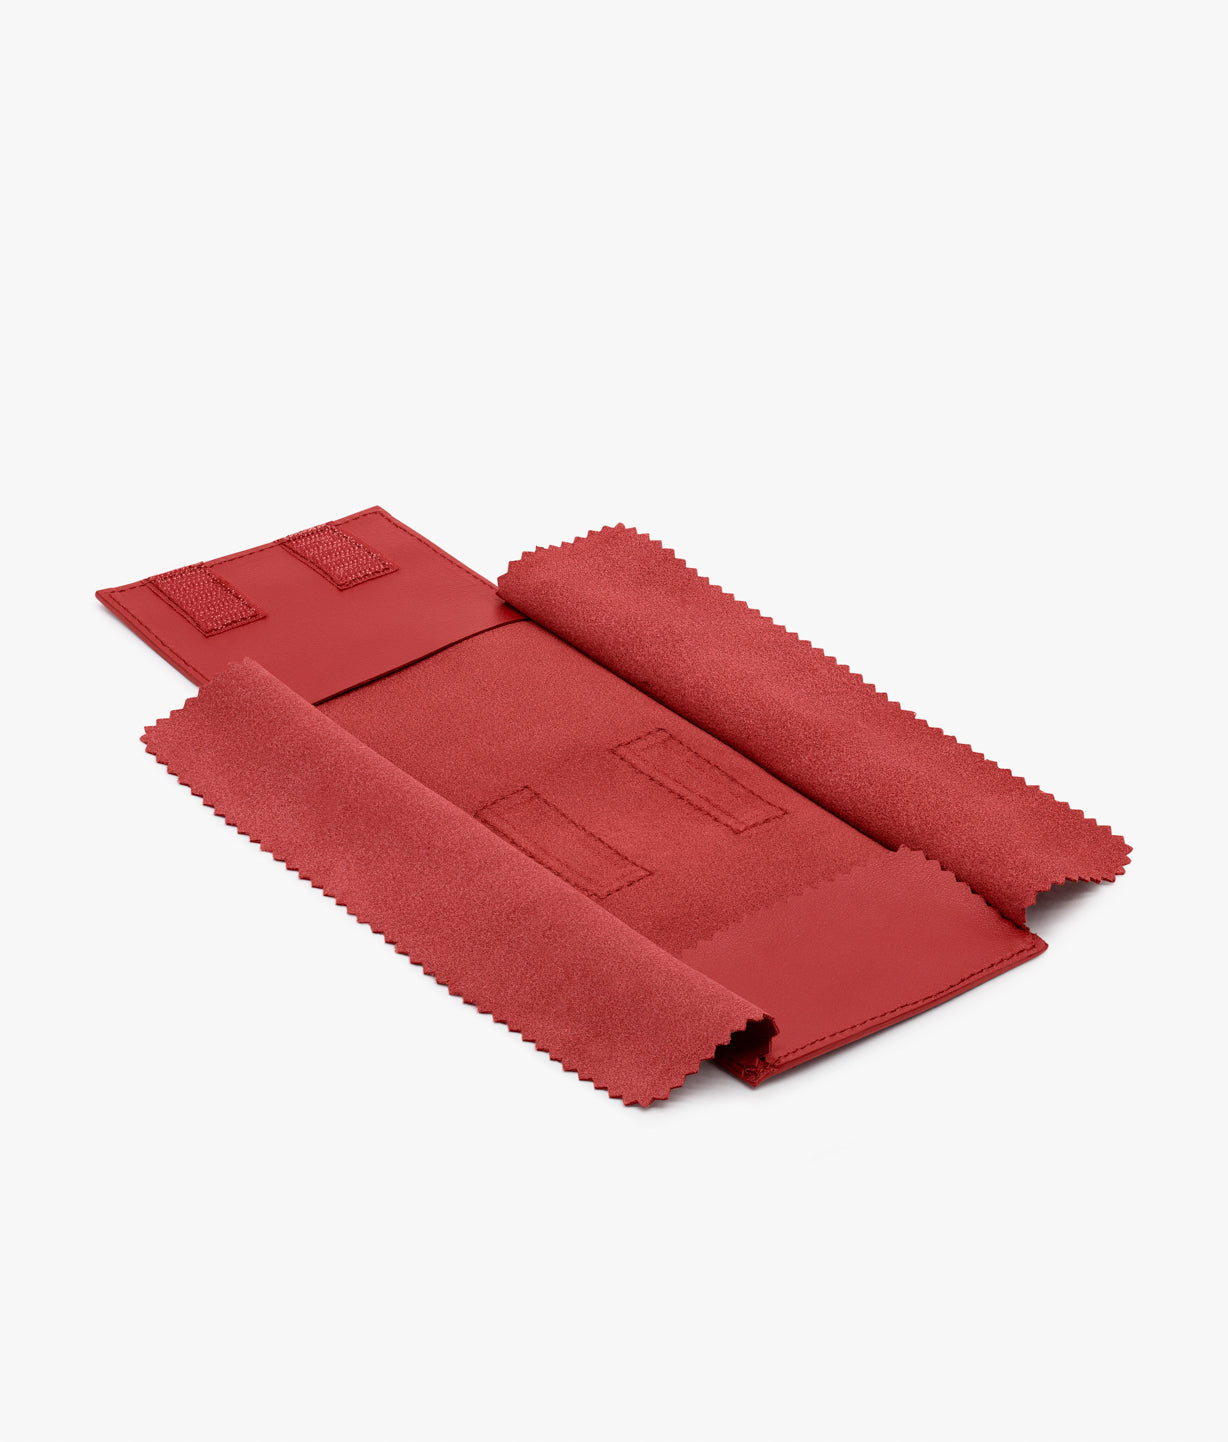 Jewelry roll blanket Red